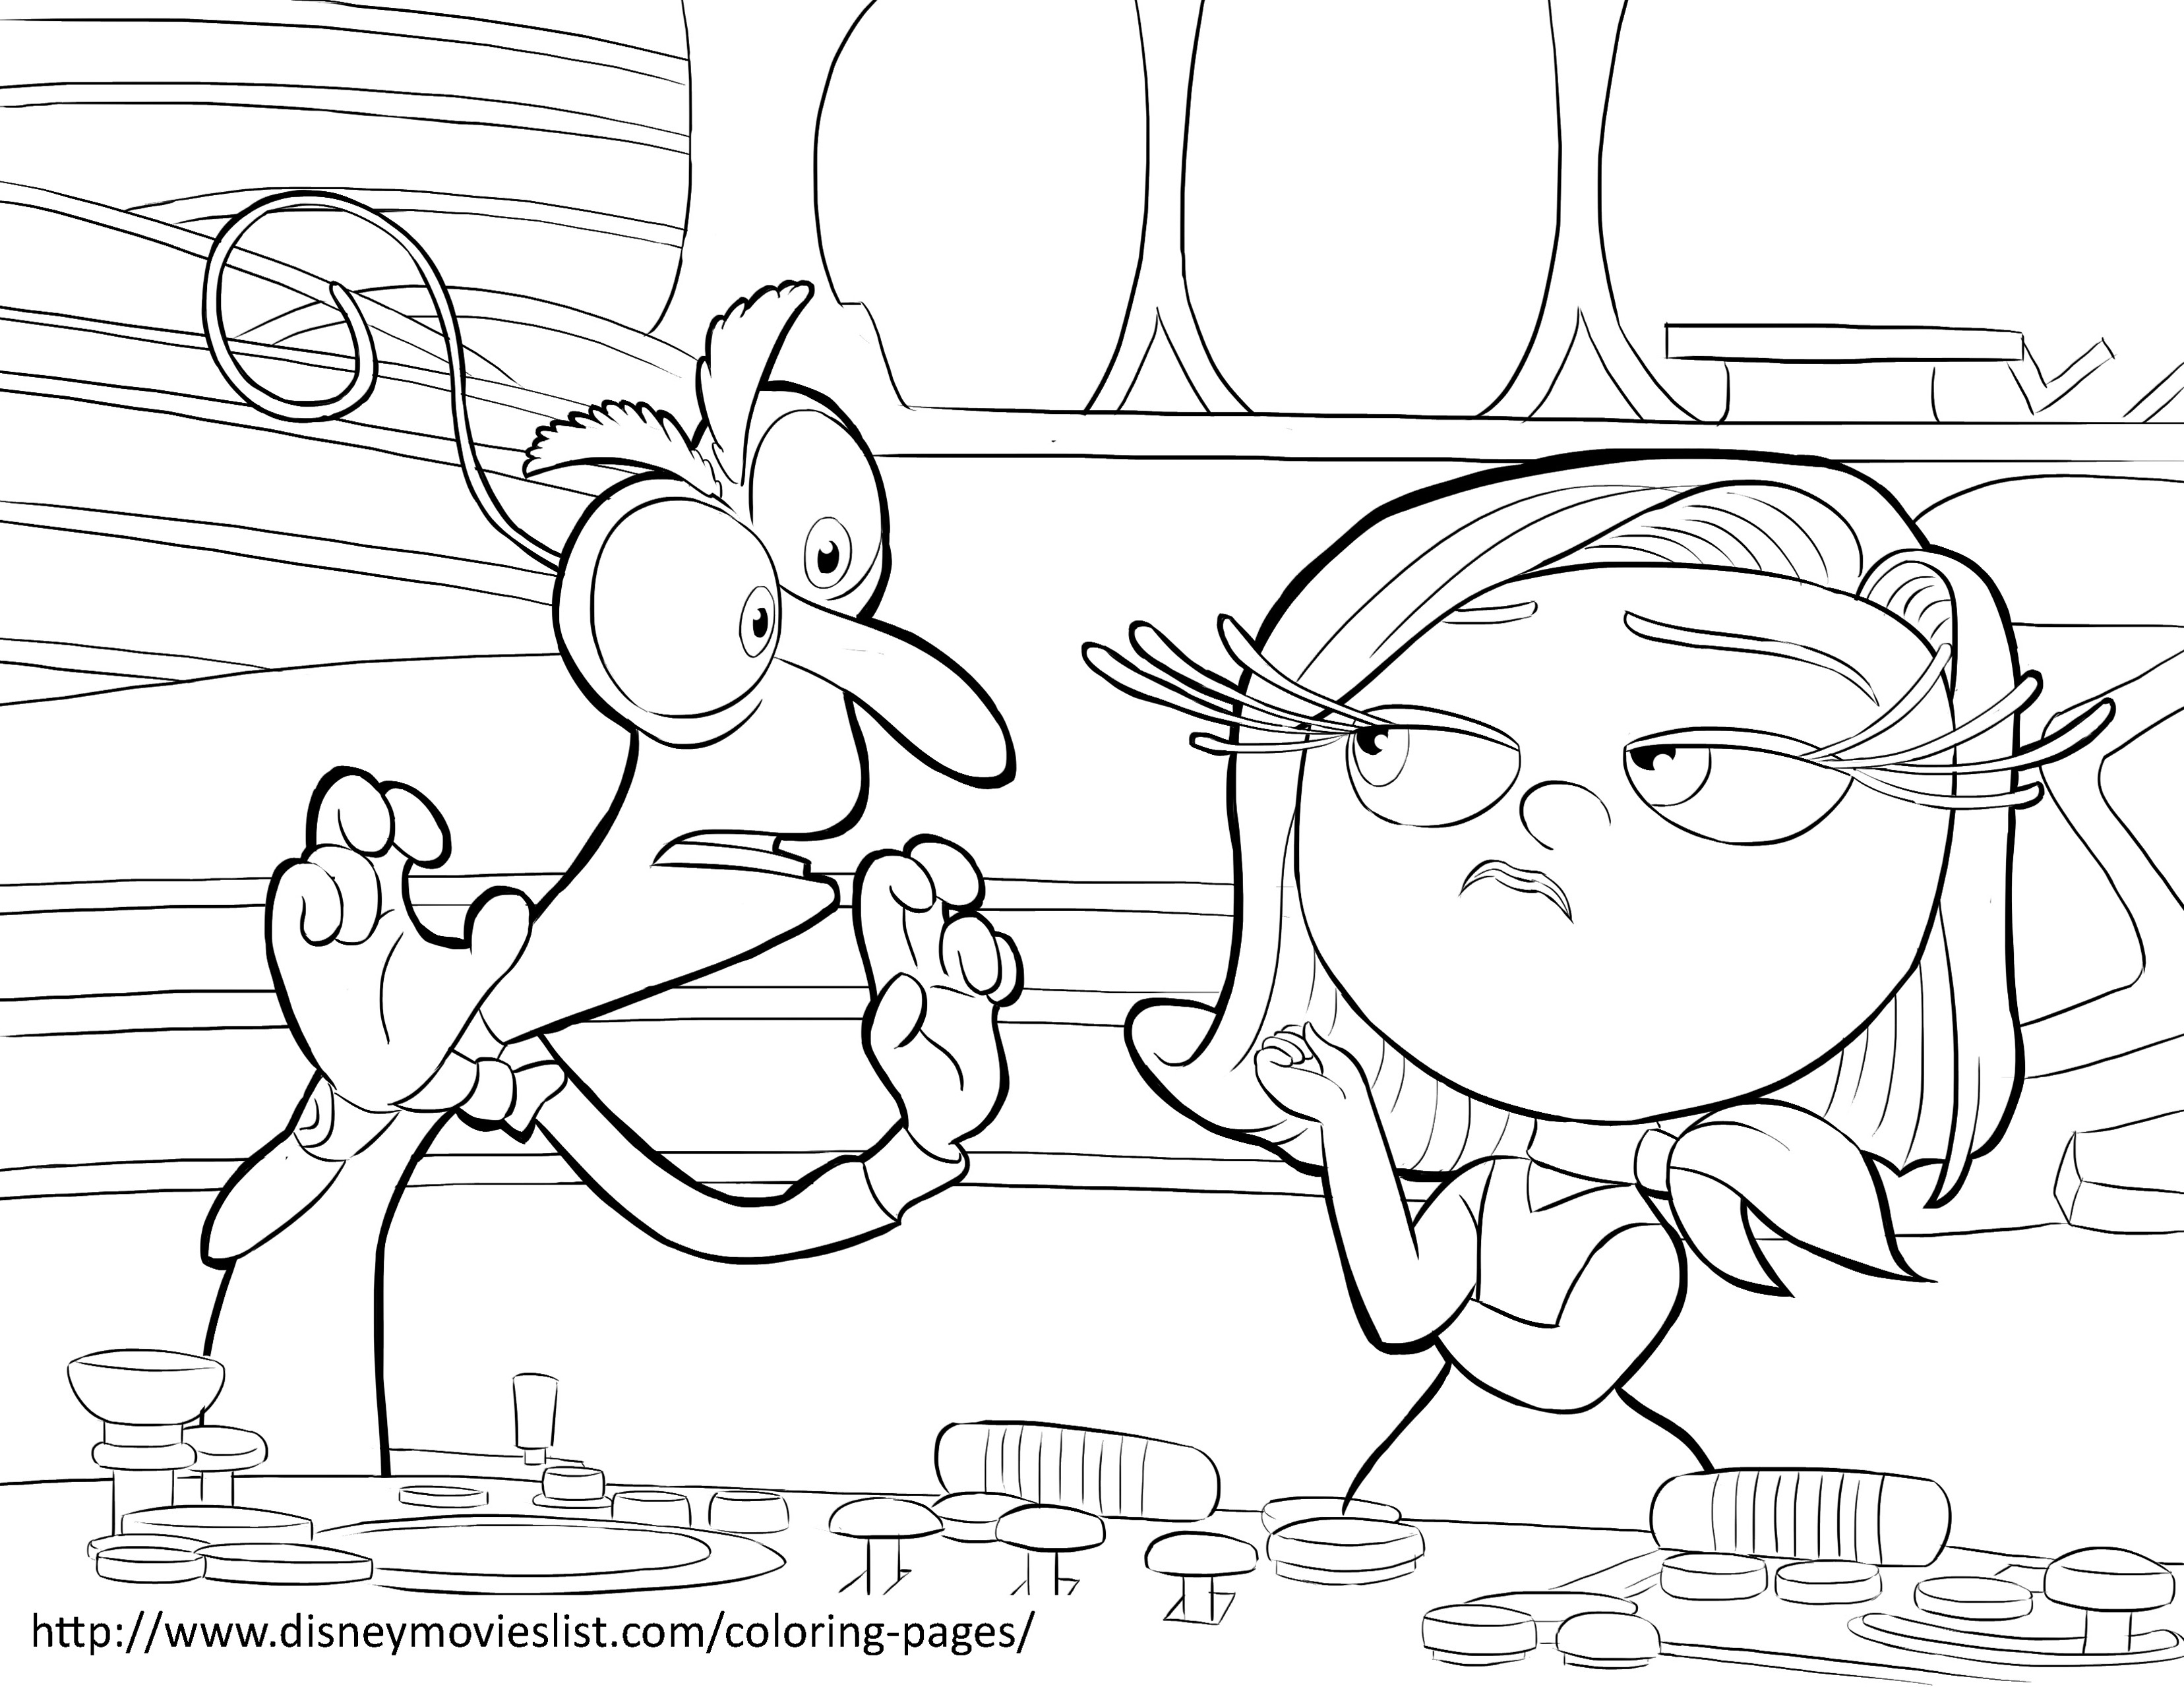 Inside out to download - Inside Out Kids Coloring Pages